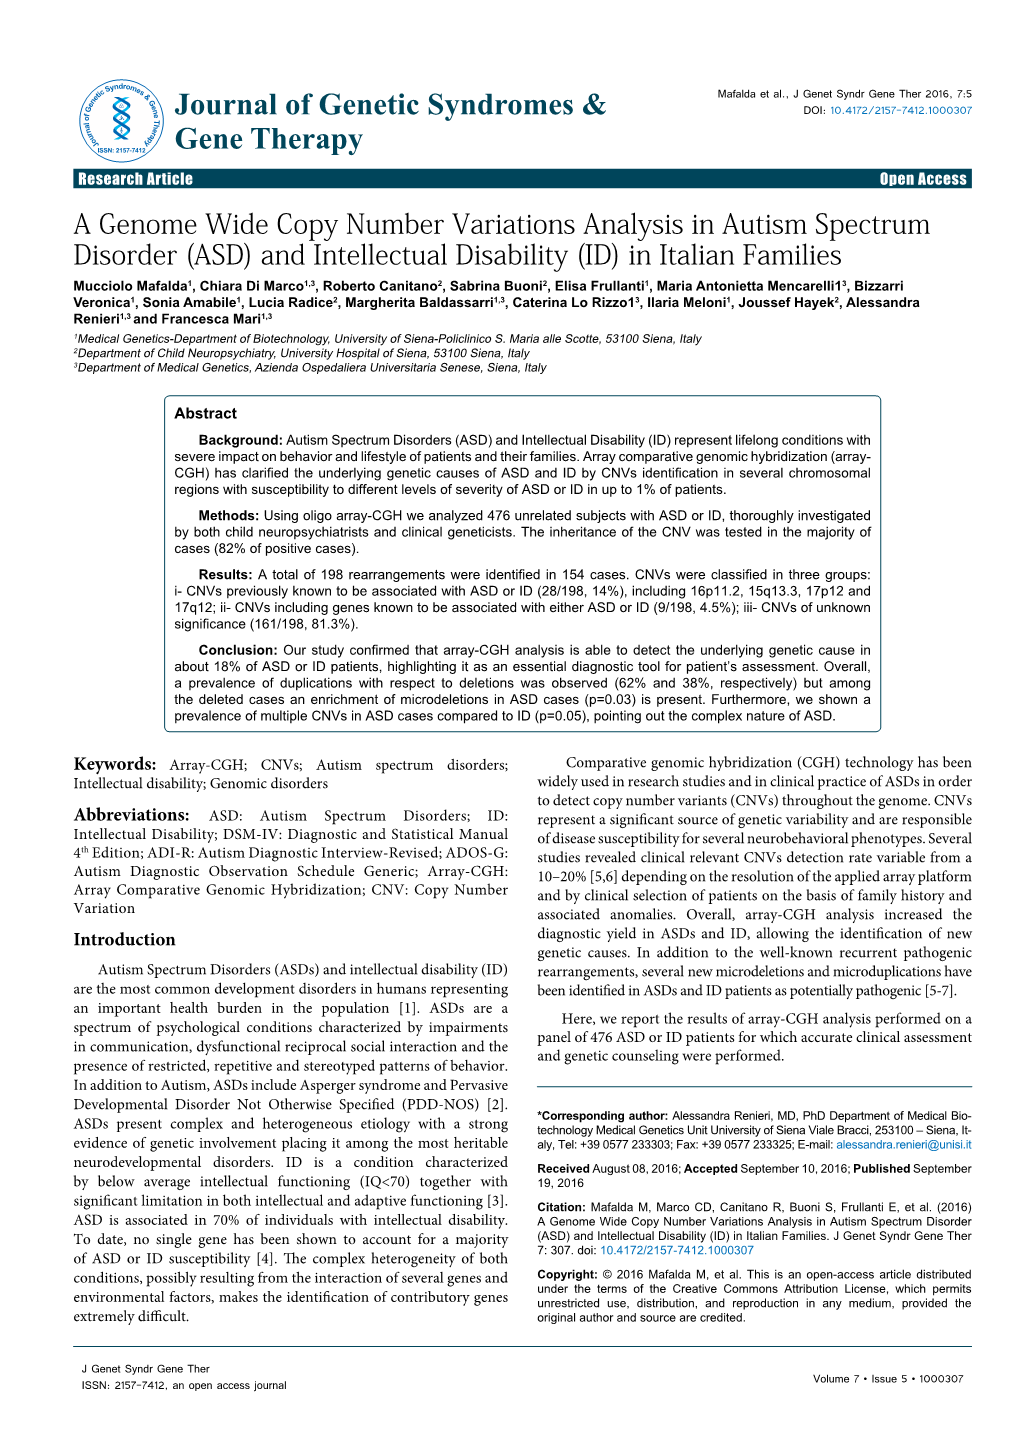 (ASD) and Intellectual Disability